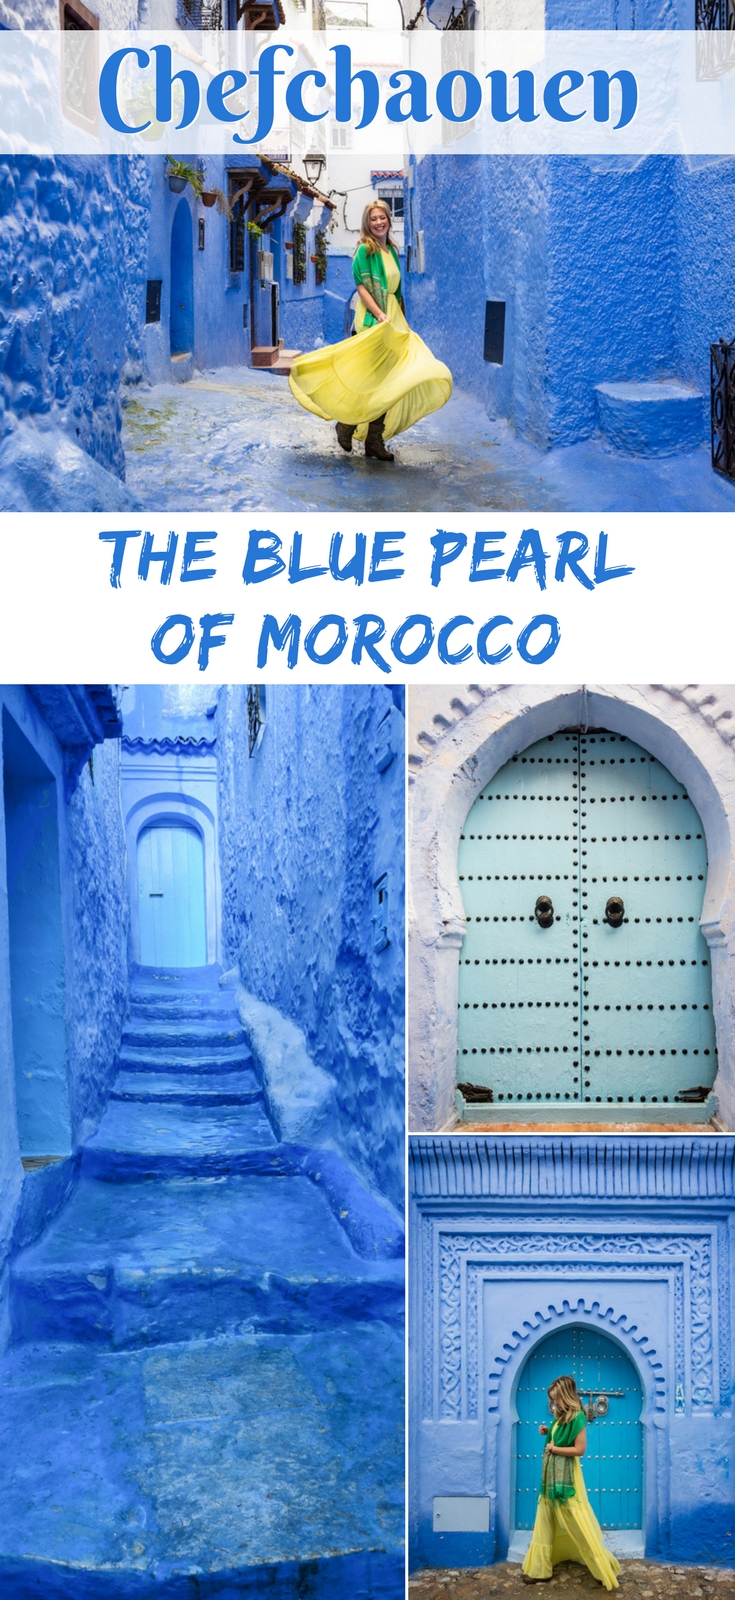 Chefchaouen, The Blue Pearl of Morocco by Wandering Wheatleys